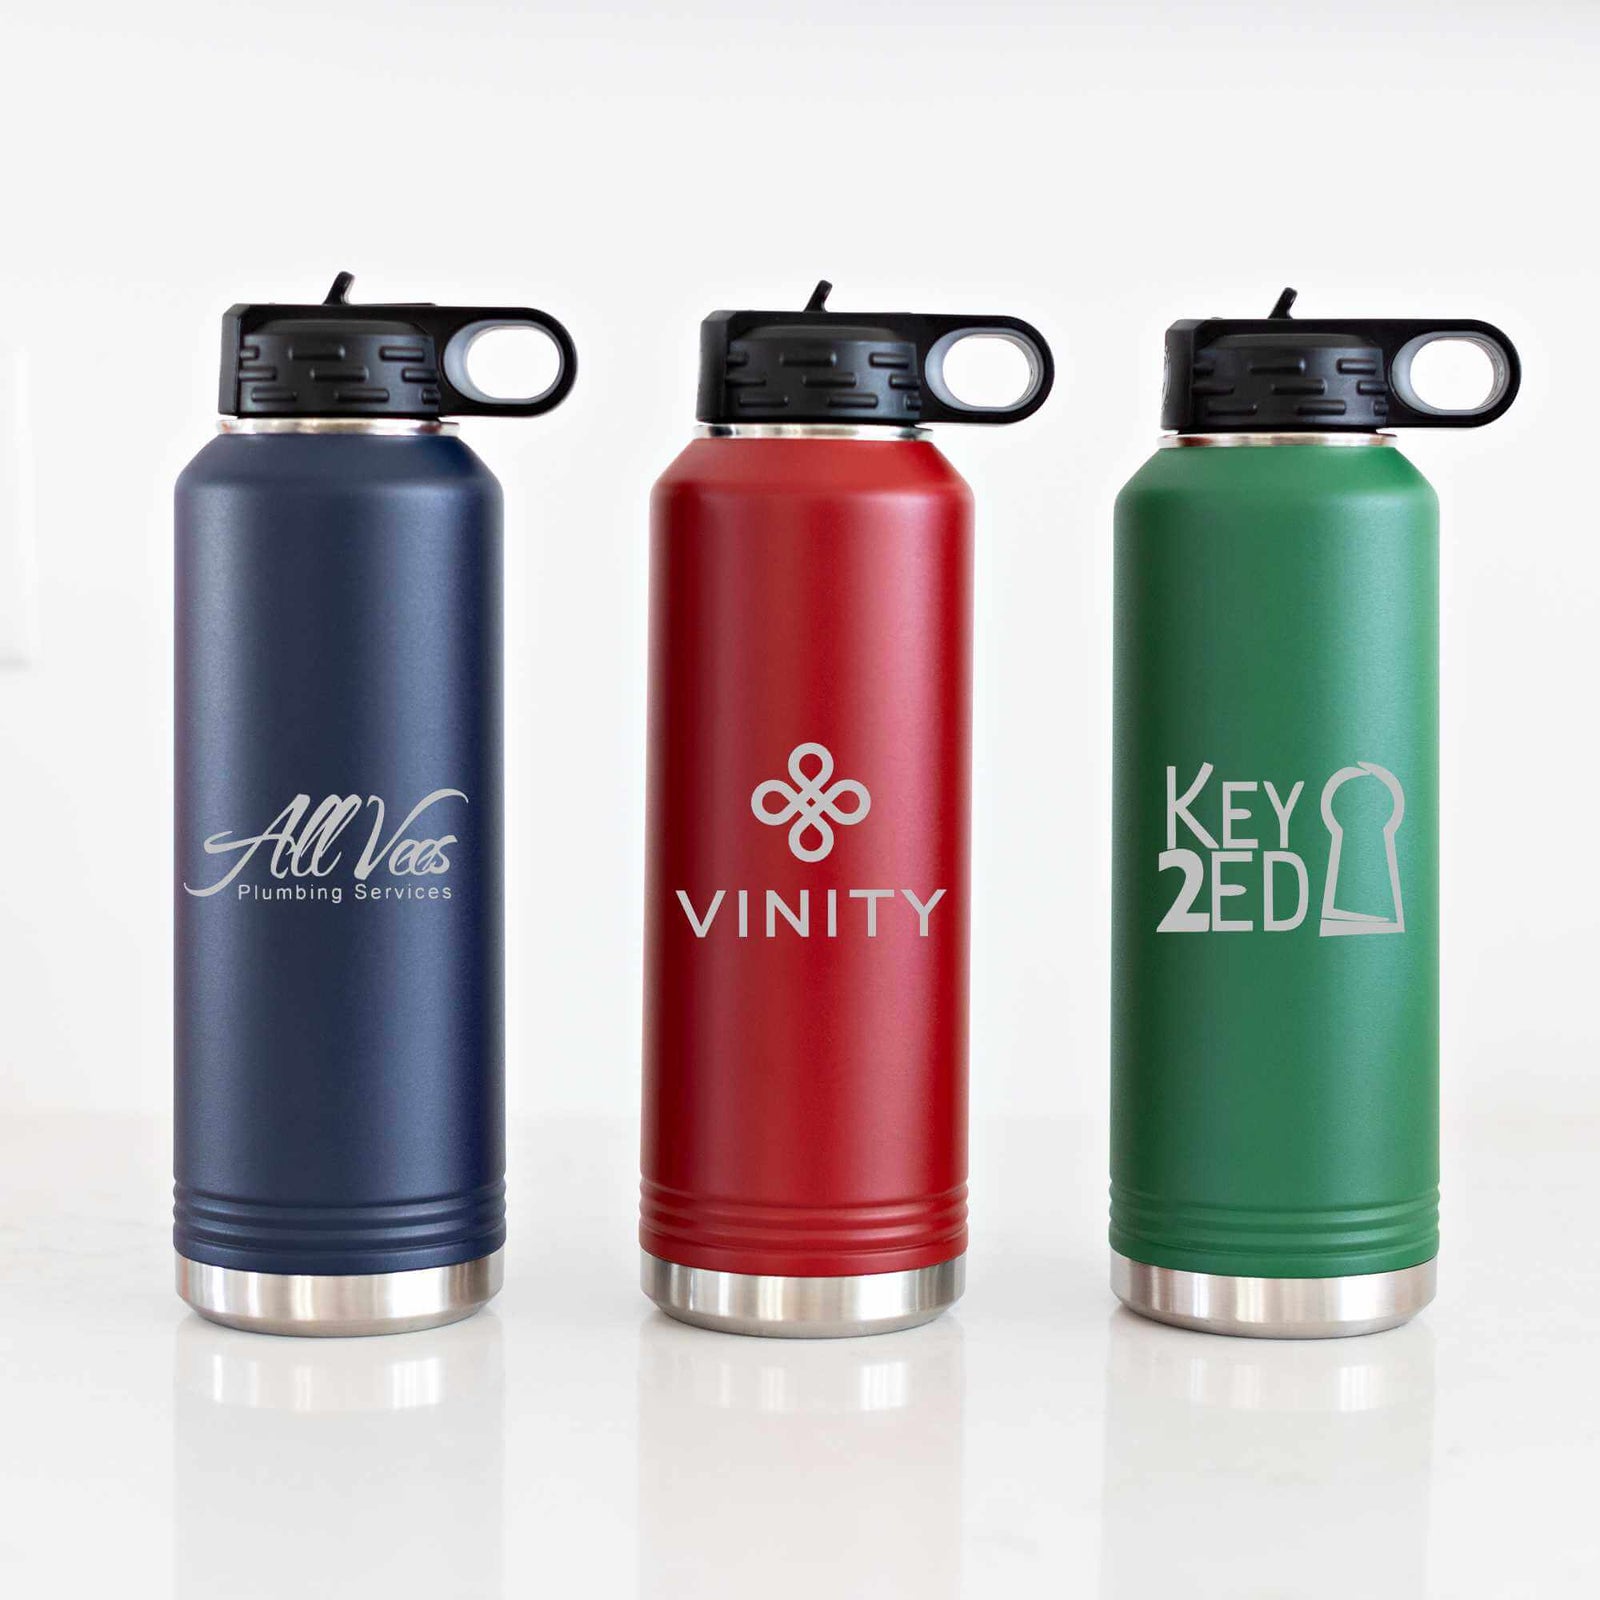 40 oz Insulated Steel Water Bottle with Business Logo